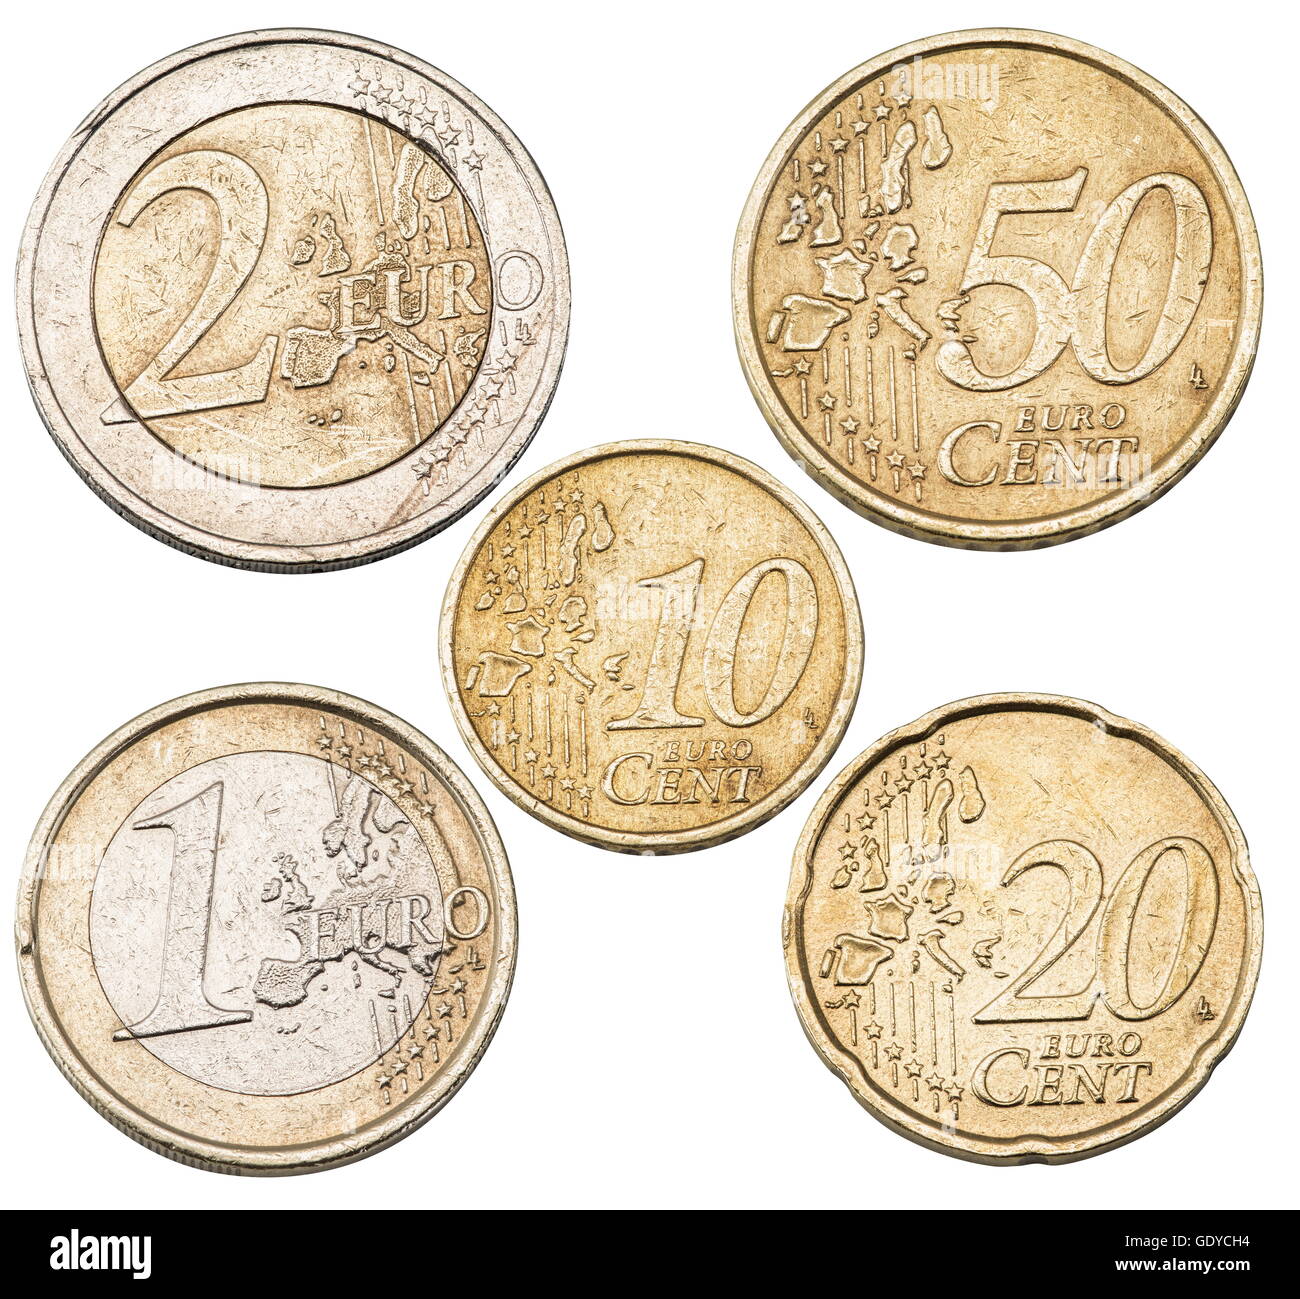 Set of Euro coins isolated on the white background.File contains clipping paths for each coin. Stock Photo